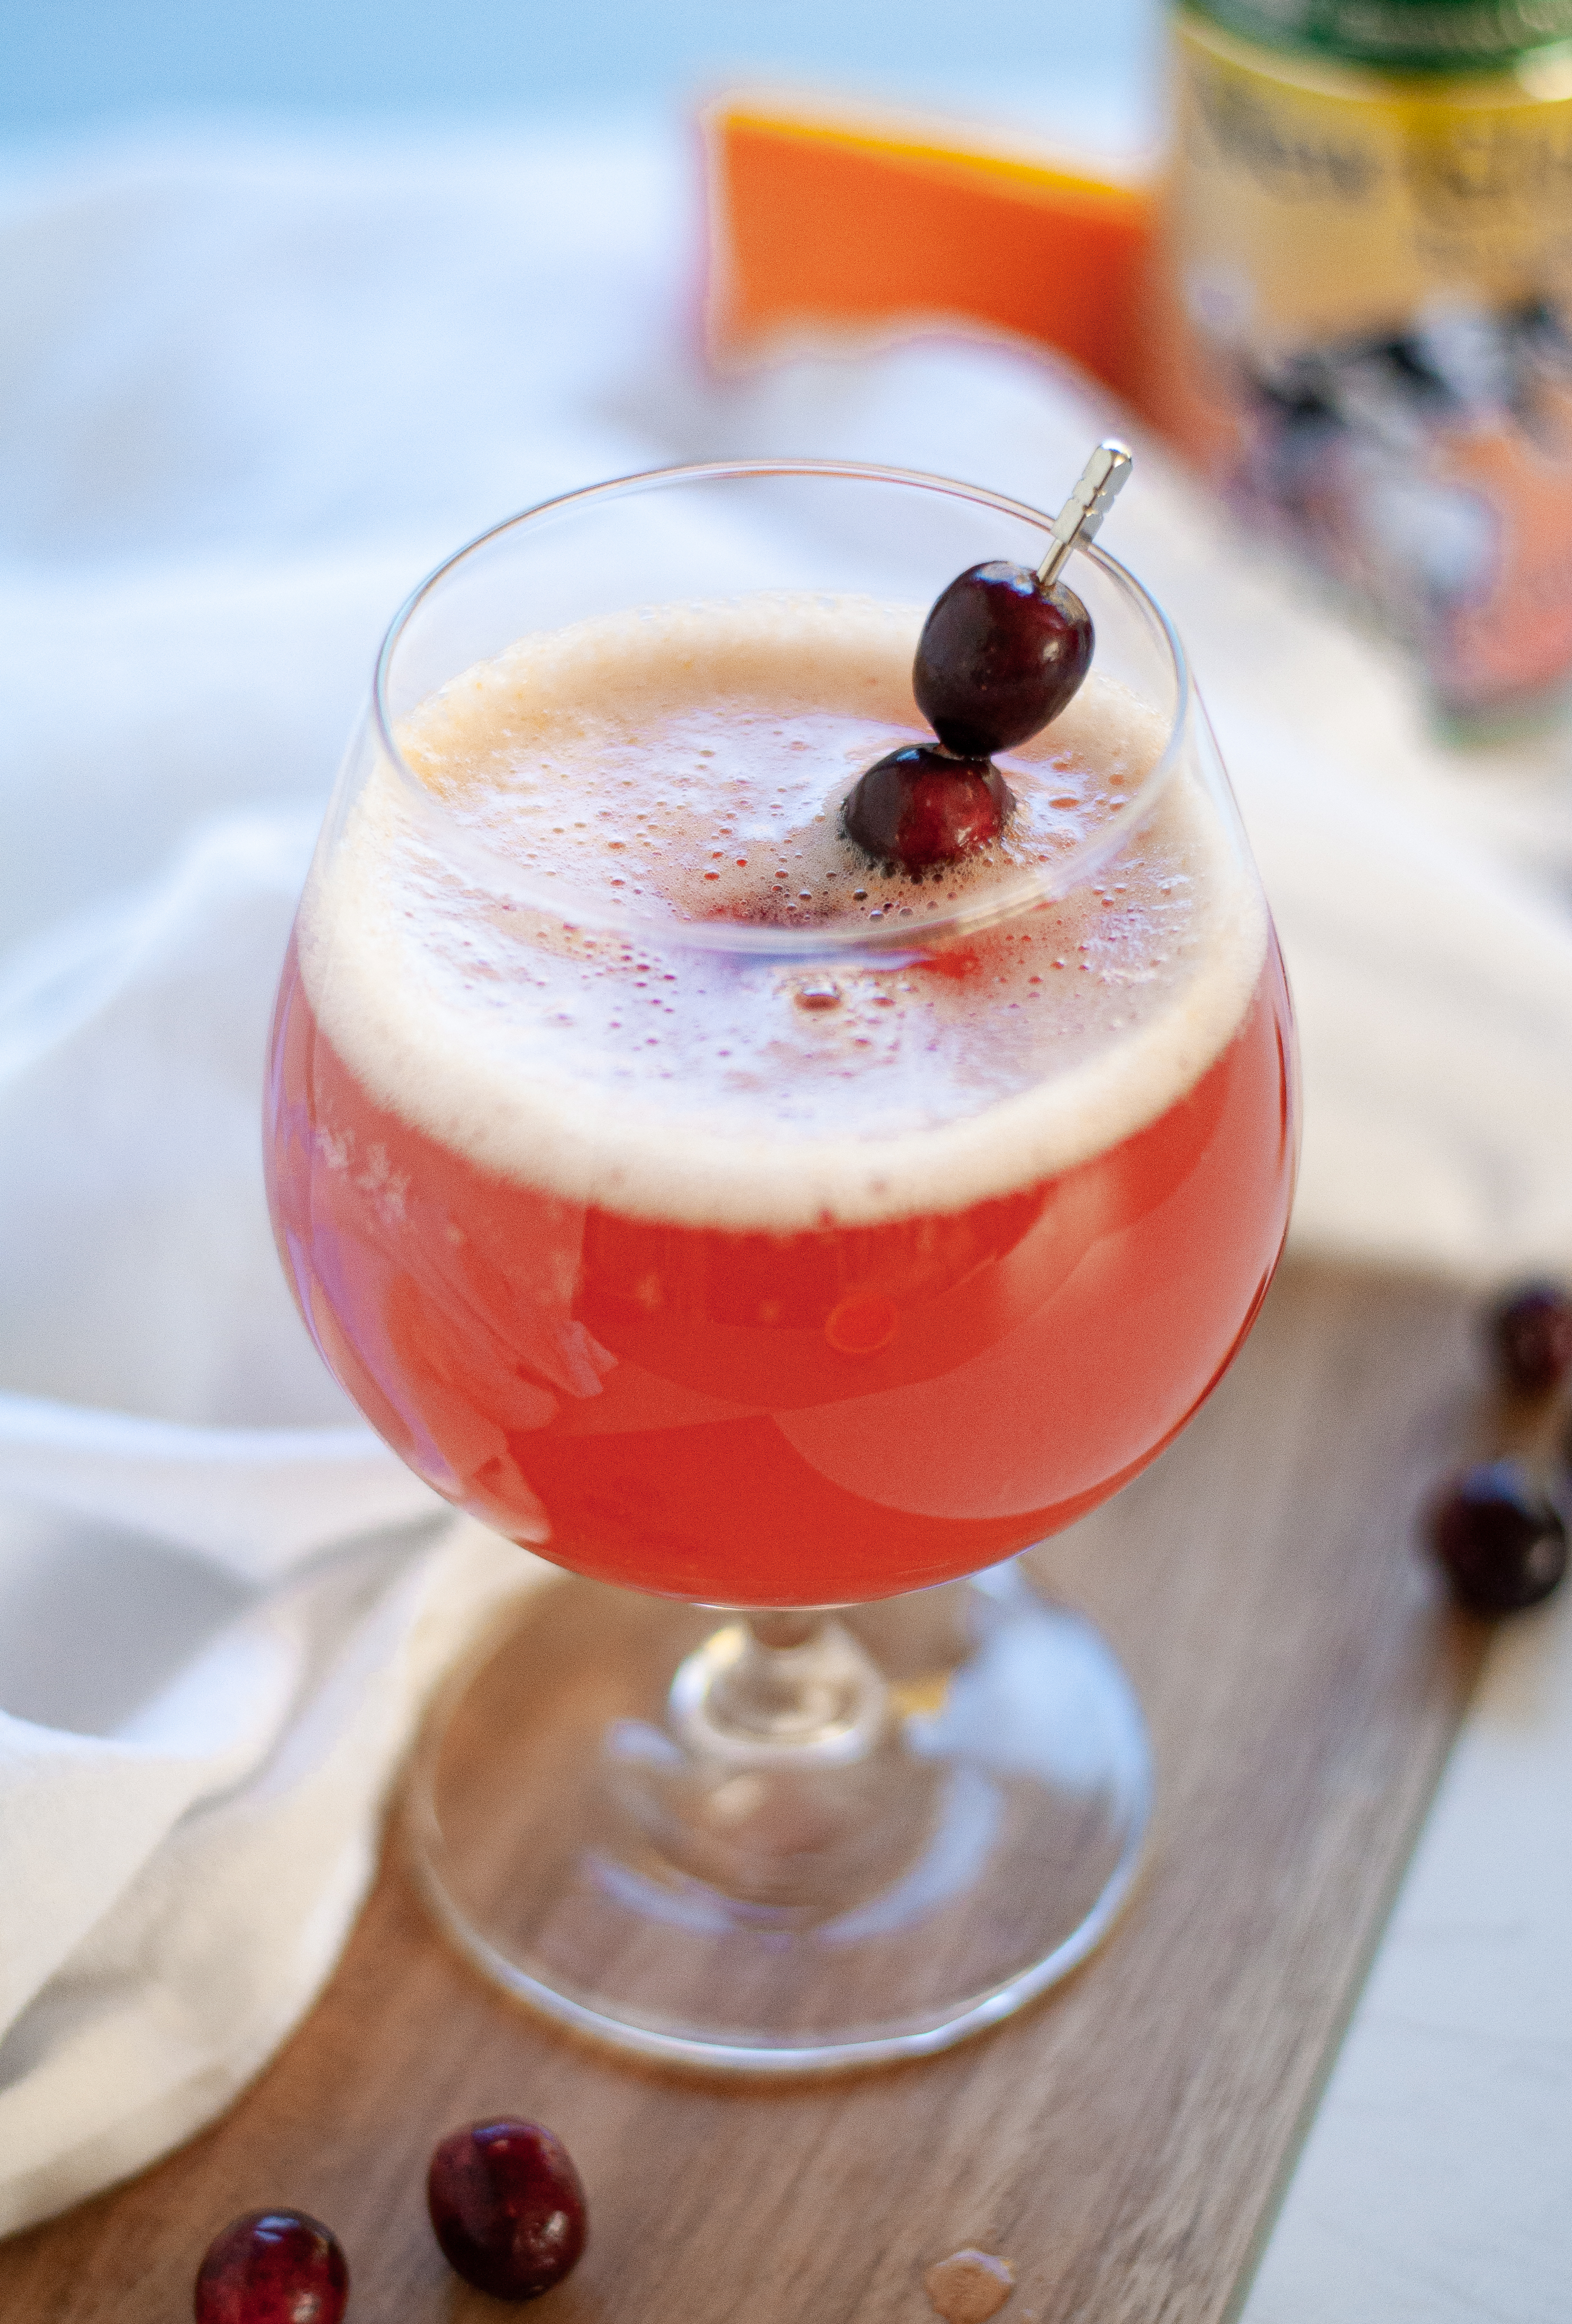 Close up of a cranberry beer shandy garnished with fresh cranberries. The glass of cranberry shandy is surrounded by fresh cranberries, a white napkin, and is in front of a can of farmhouse ale and orange halve.